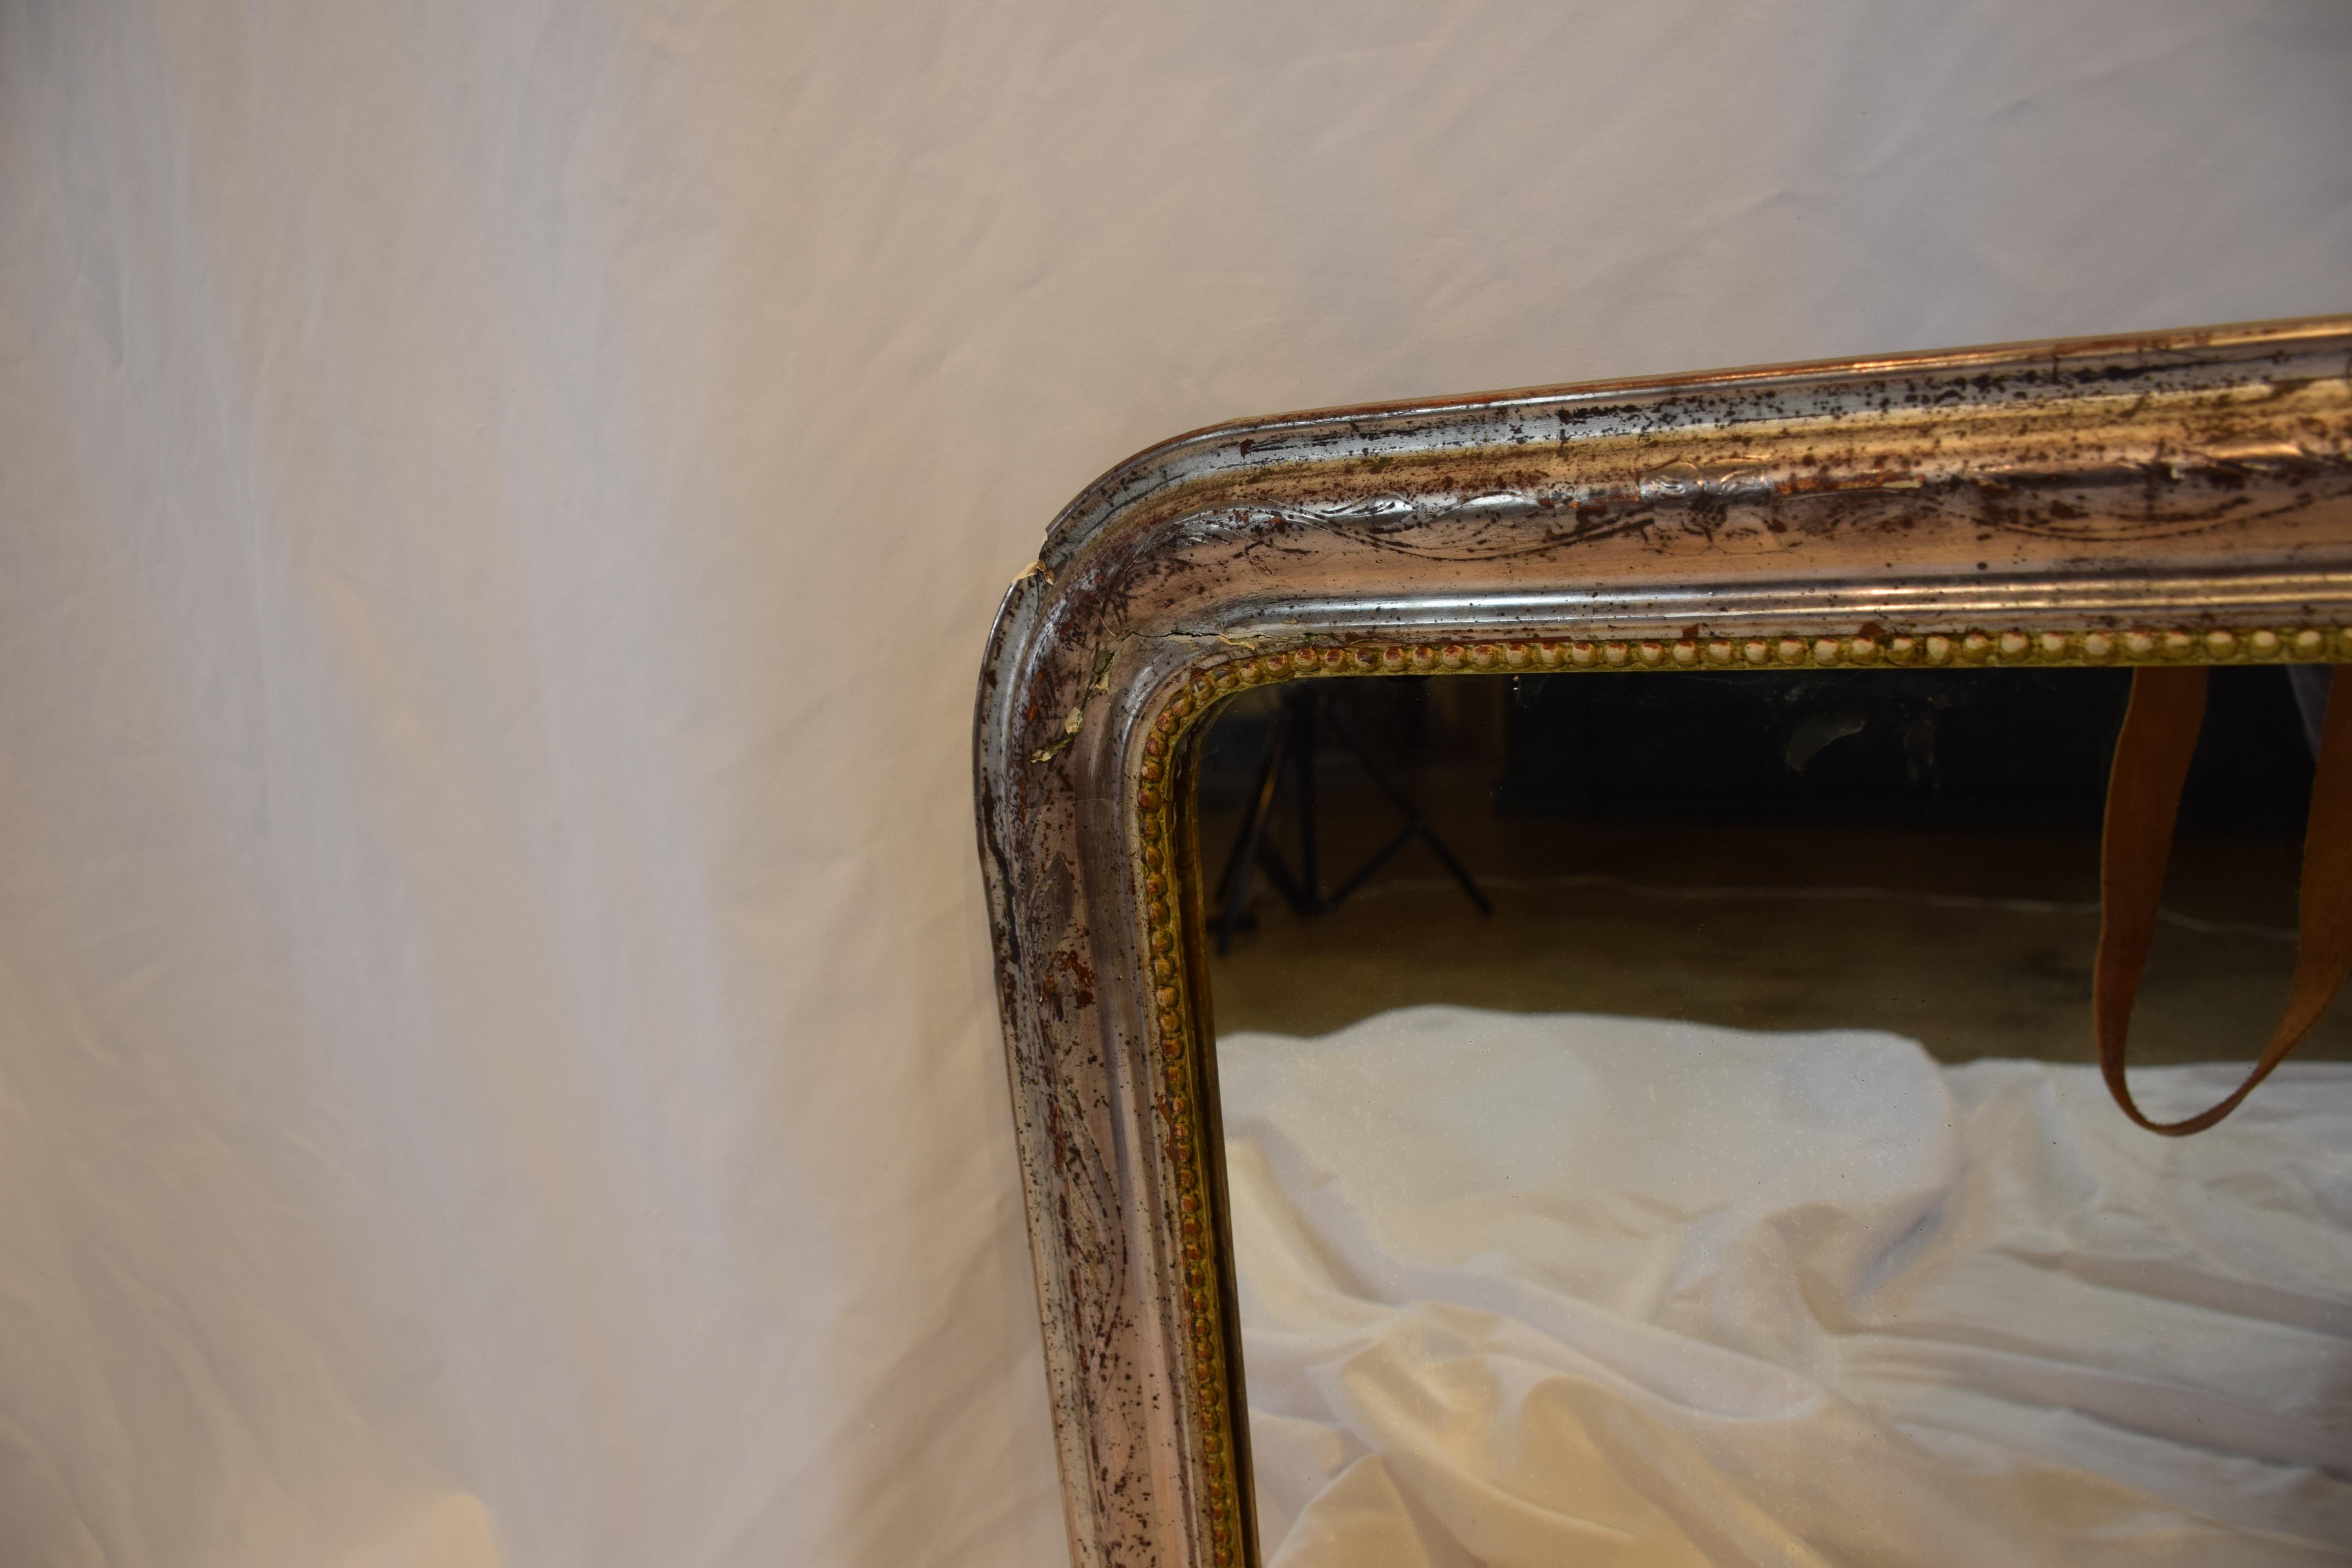 Antique 19th century French silver gilt Louis Philippe mirror
Measures: 19 1/4